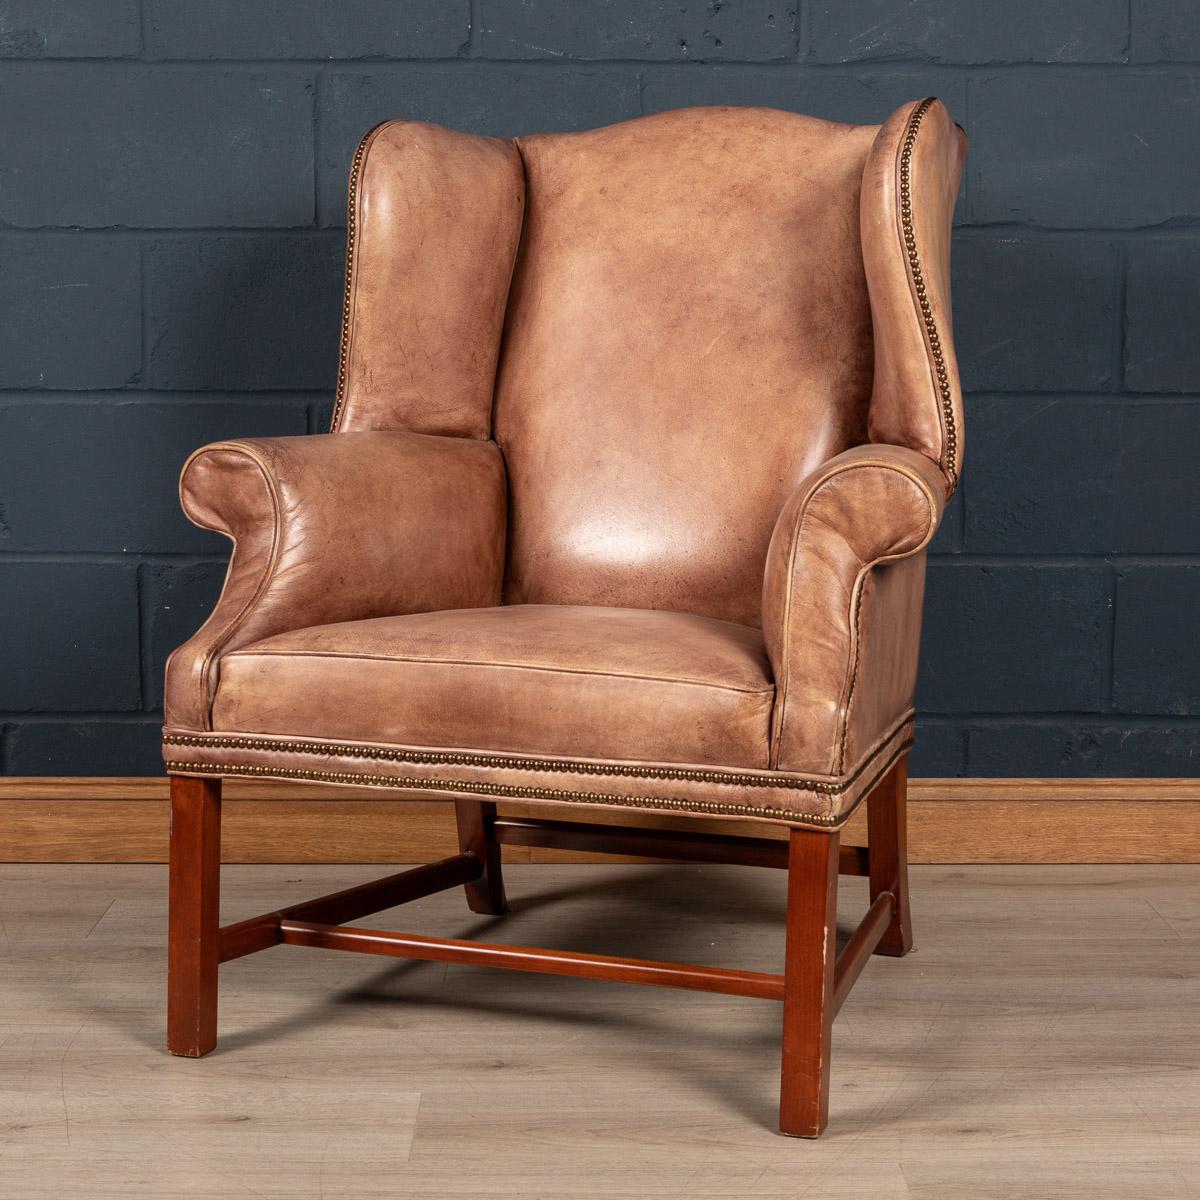 A lovely example of English leather craftsmanship. Dating to the latter part of the 20th century, this leather wing-back armchair has a beautiful tan colour, great proportions and lovely patina.

Condition
In Good Condition - wear and tear